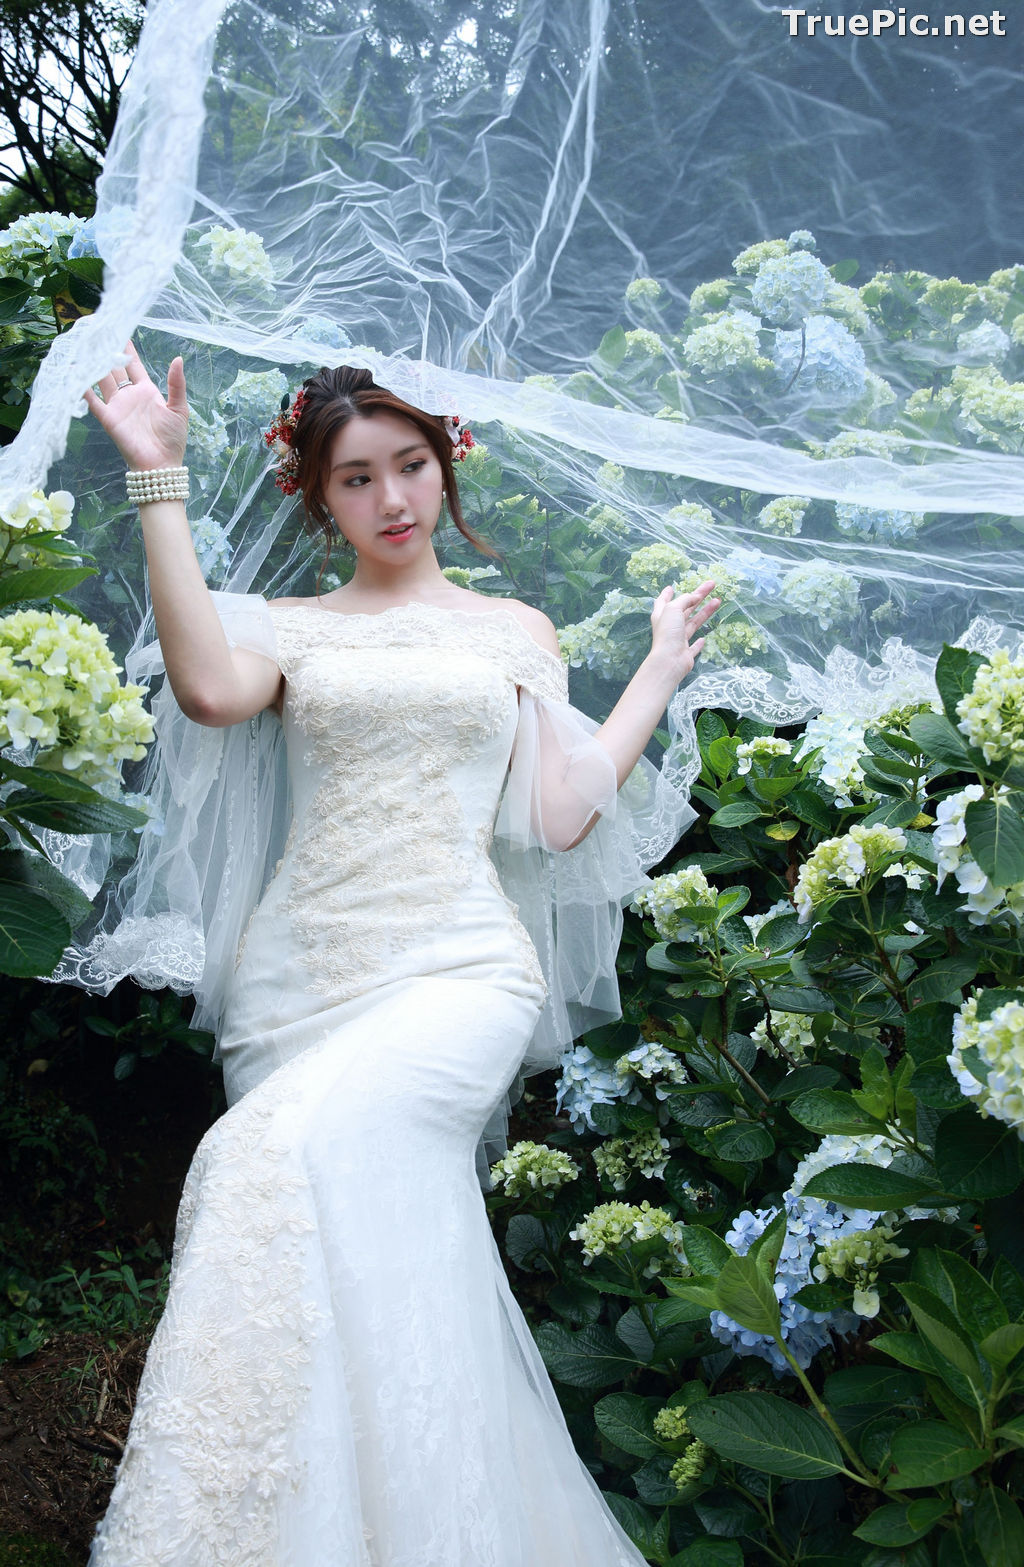 Image Taiwanese Model - 張倫甄 - Beautiful Bride and Hydrangea Flowers - TruePic.net - Picture-26